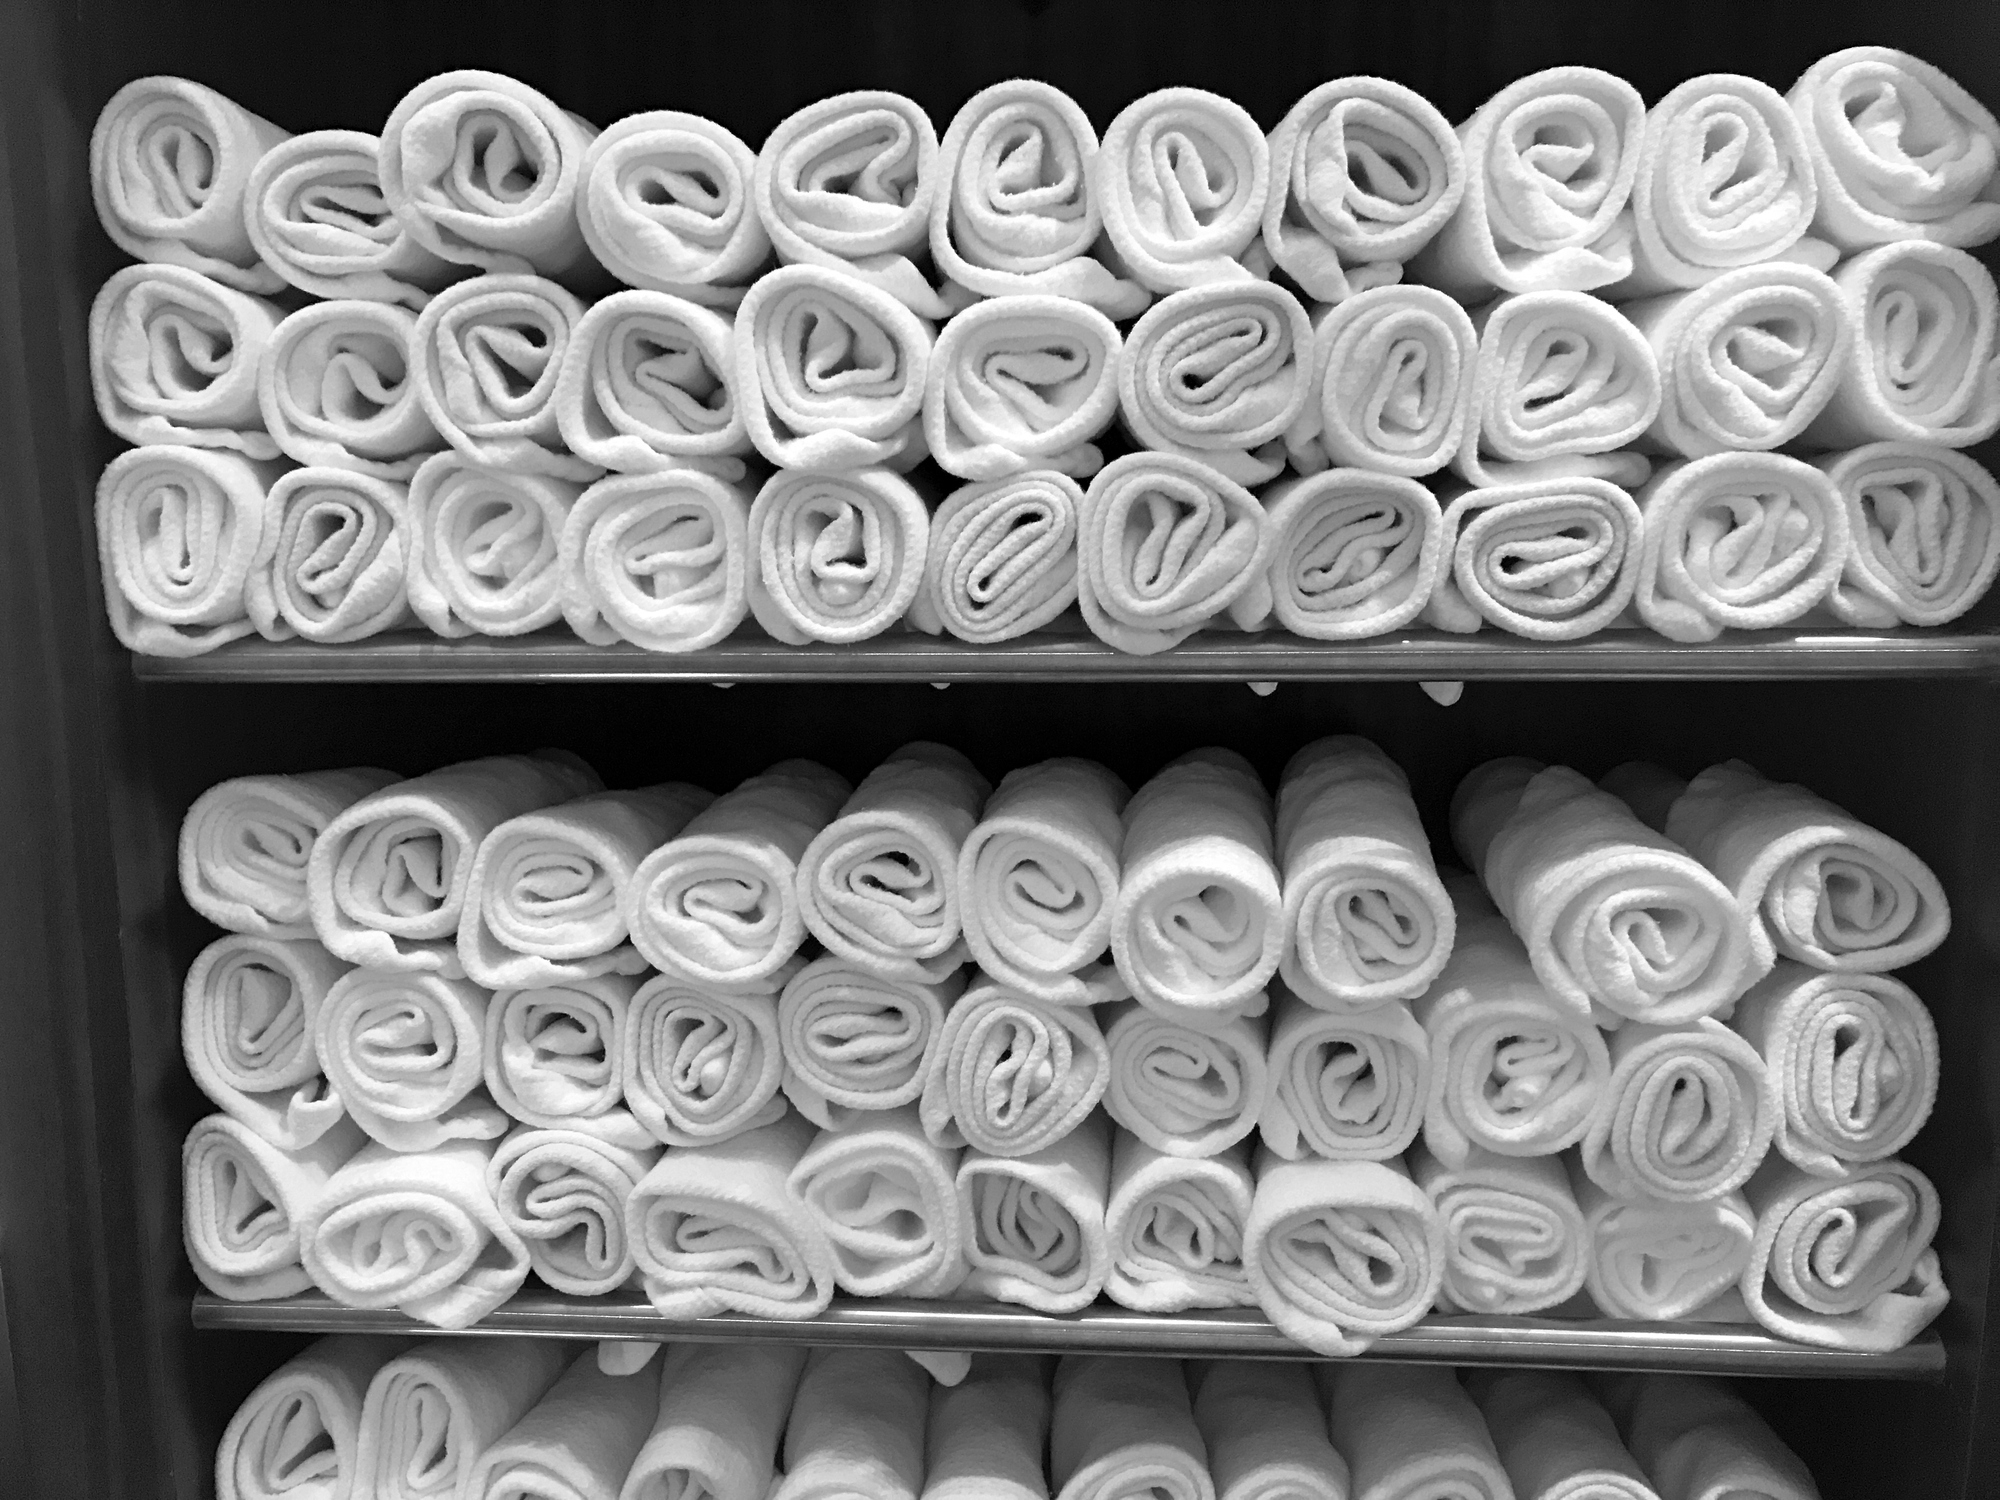 Towels are rolled up on shelves